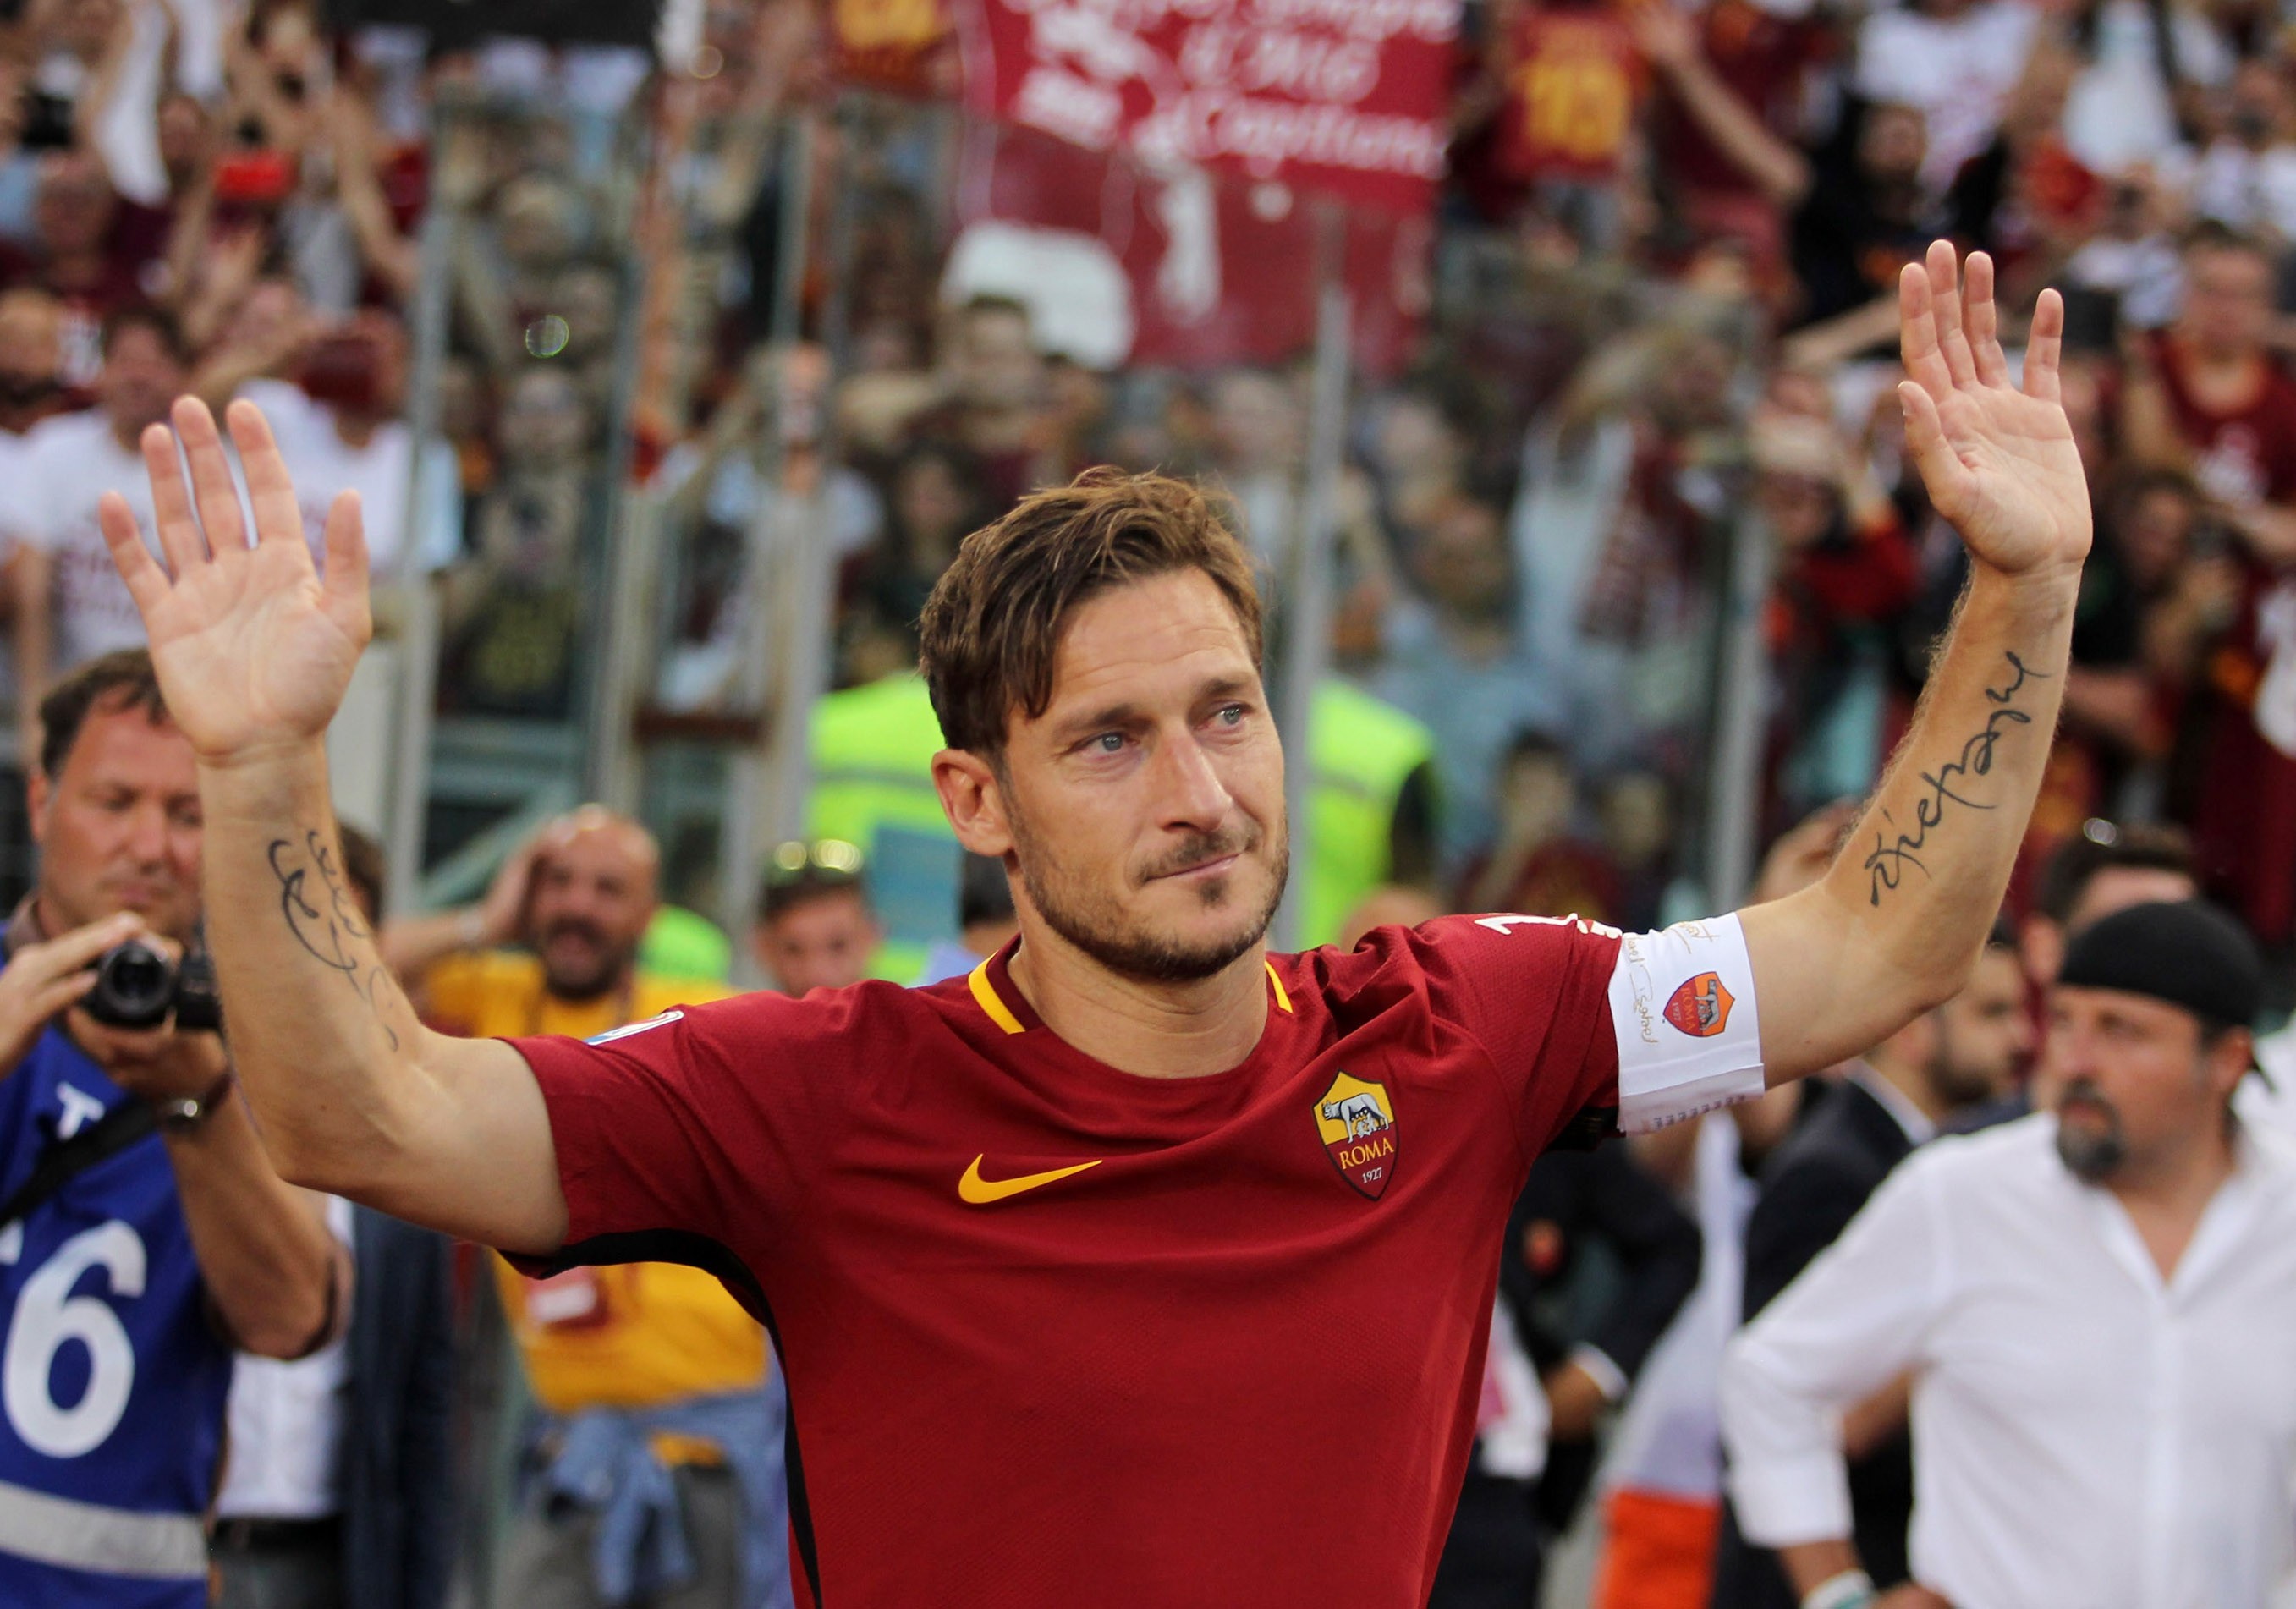 20200421-the18-image-francesco-totti-gettyimages-689445294.jpg